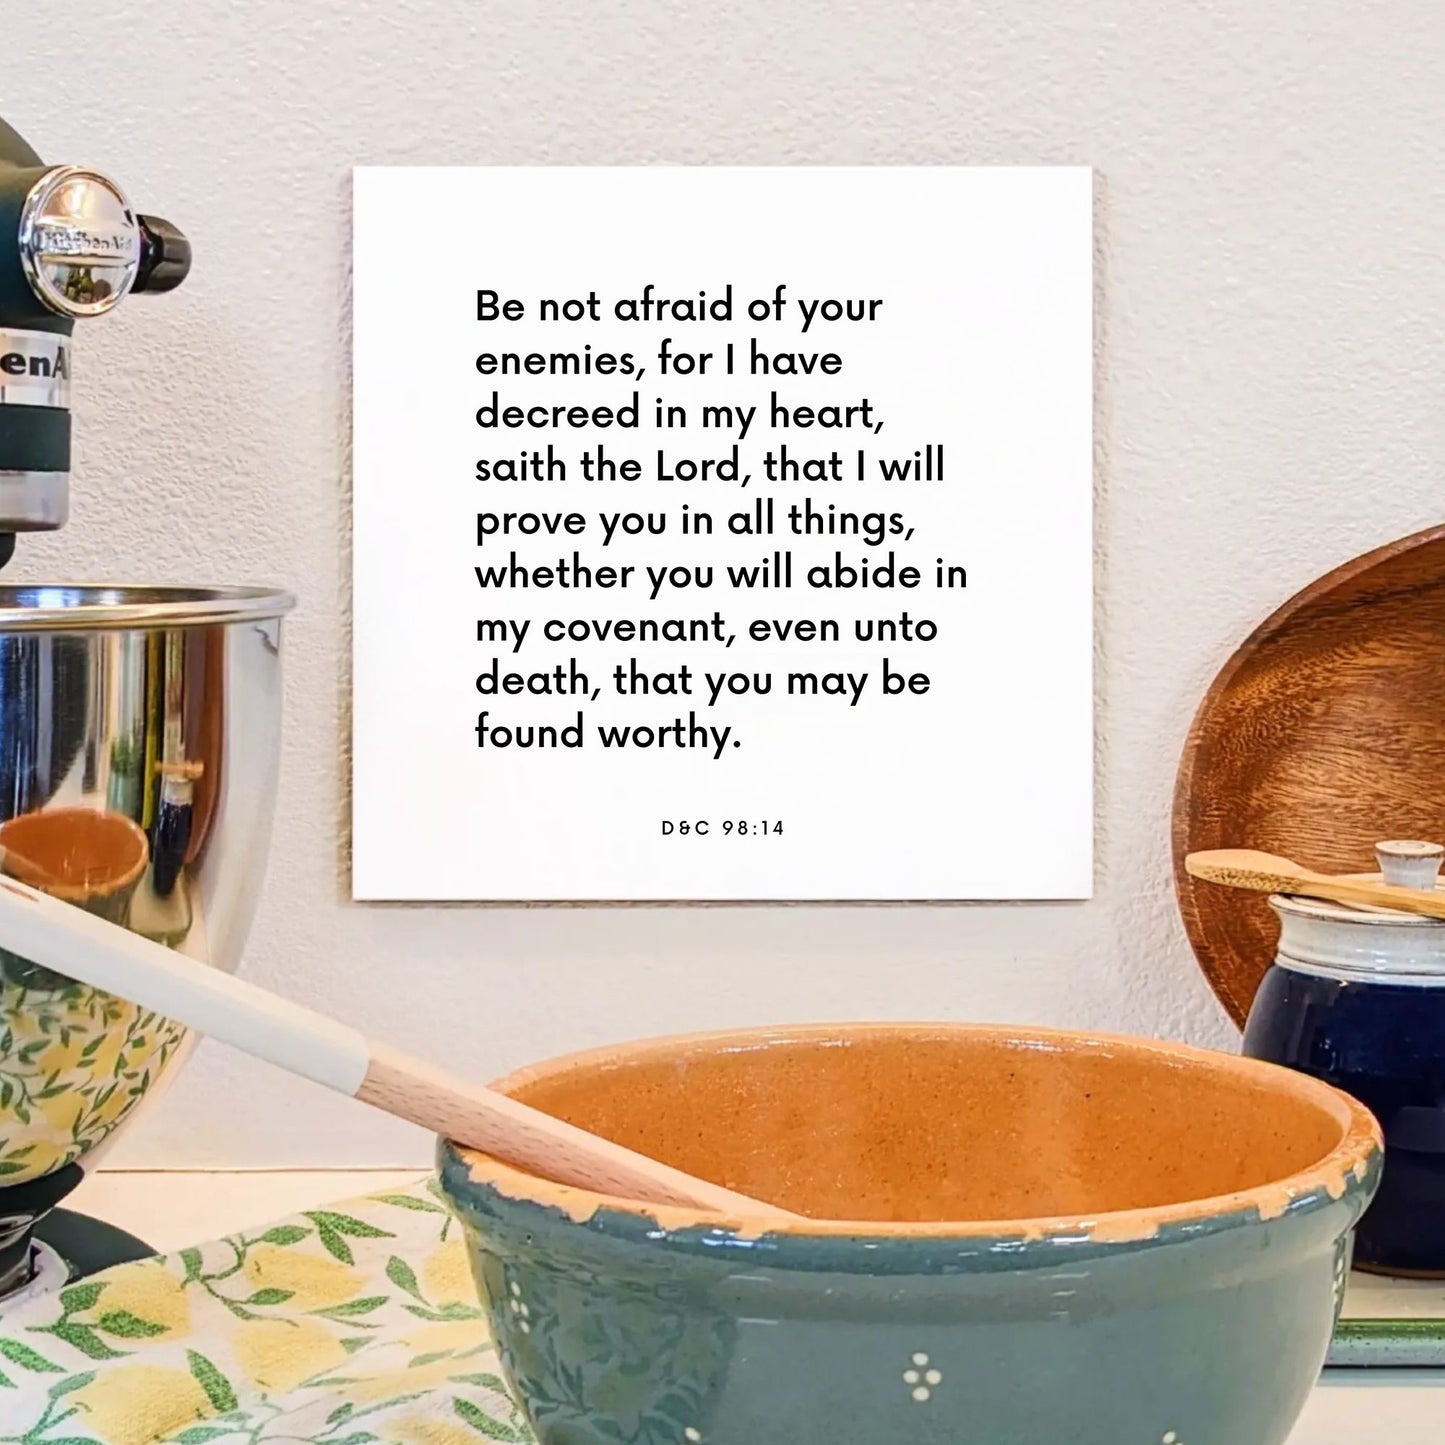 Kitchen mouting of the scripture tile for D&C 98:14 - "I will prove you in all things"